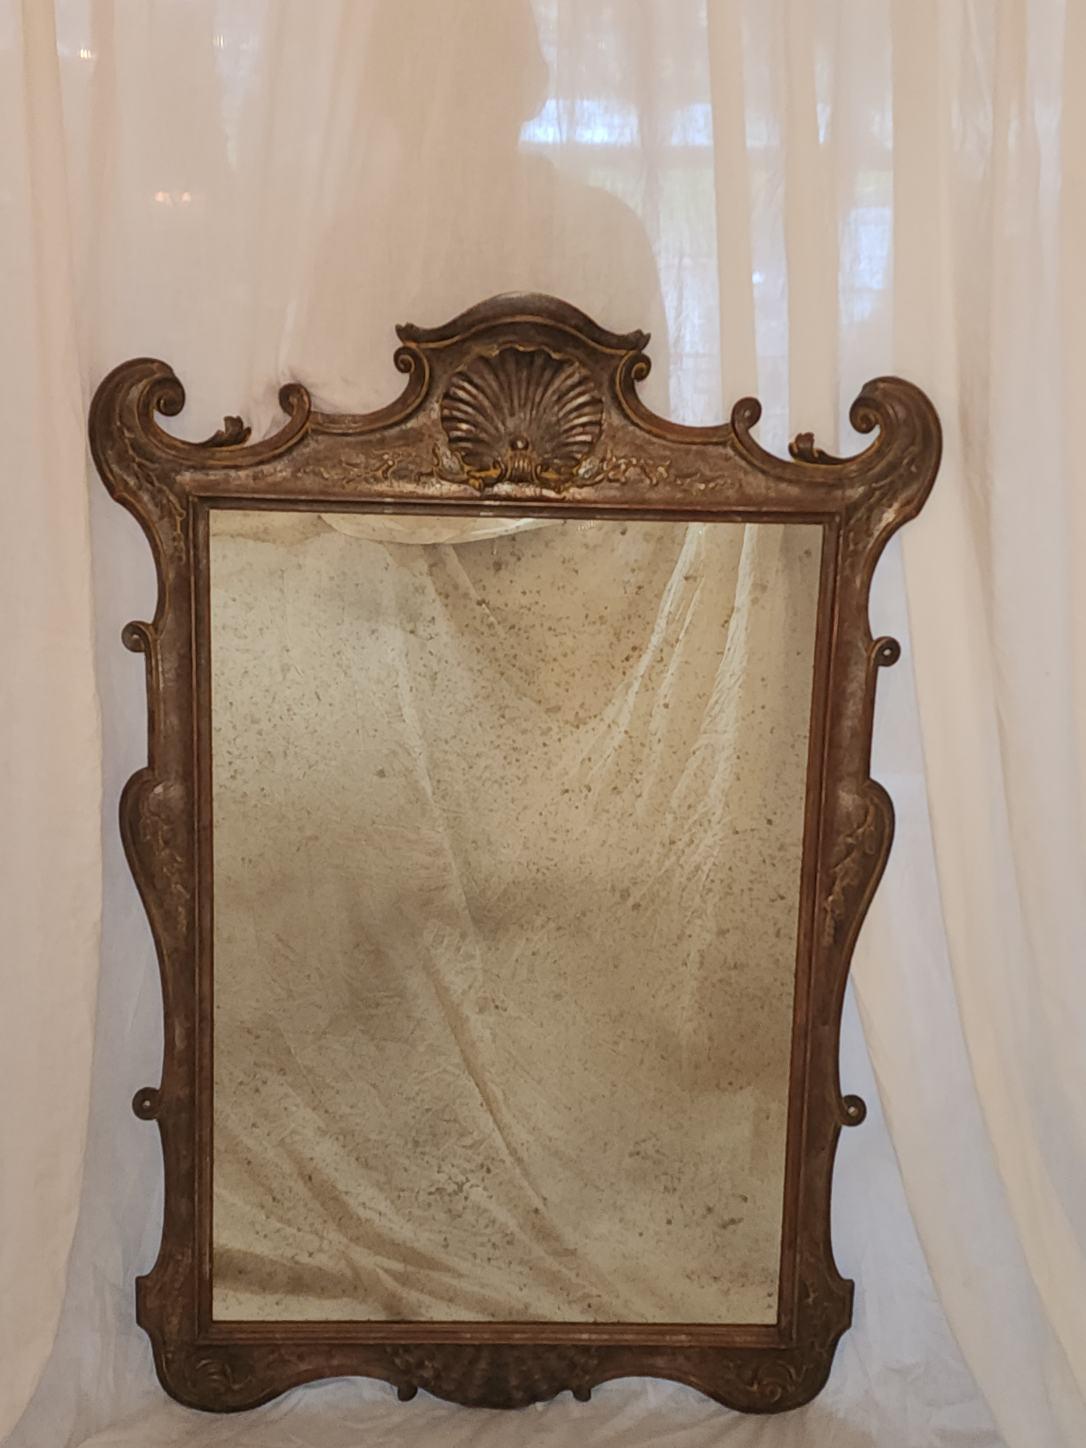 This Antique mirror is one of a kind. Made in the Baroque style, hand carved by creator Giovanni Chelini.
No work has been done on this piece, All original parts in tact.
A Vintage piece such as this one belongs in a main hallway and or study. 
A